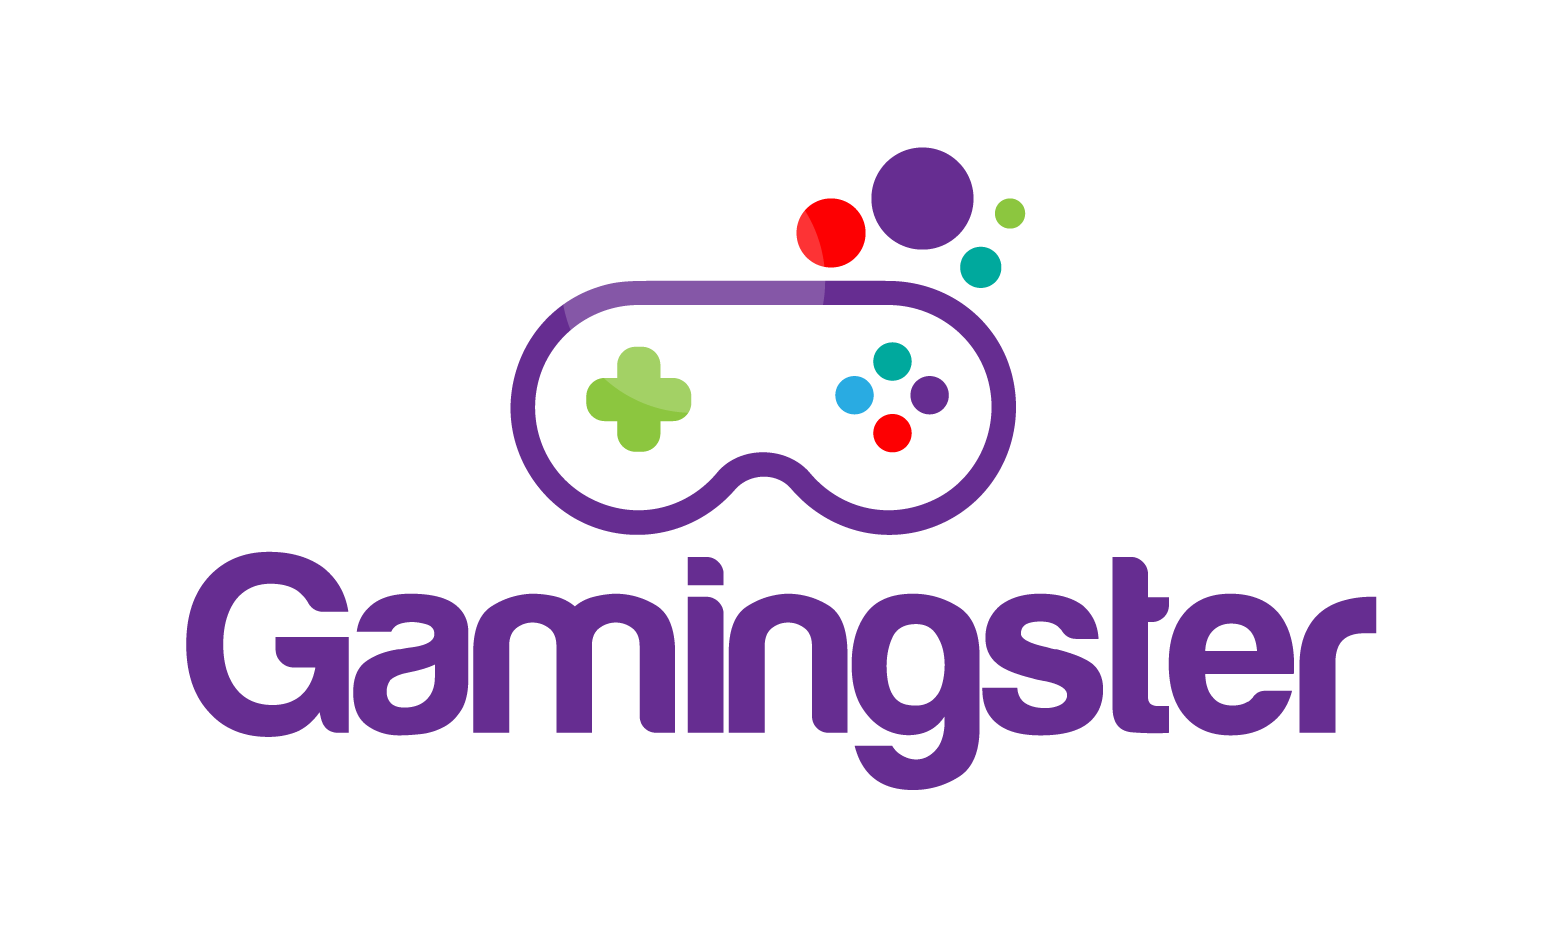 Gamingster.com - Creative brandable domain for sale